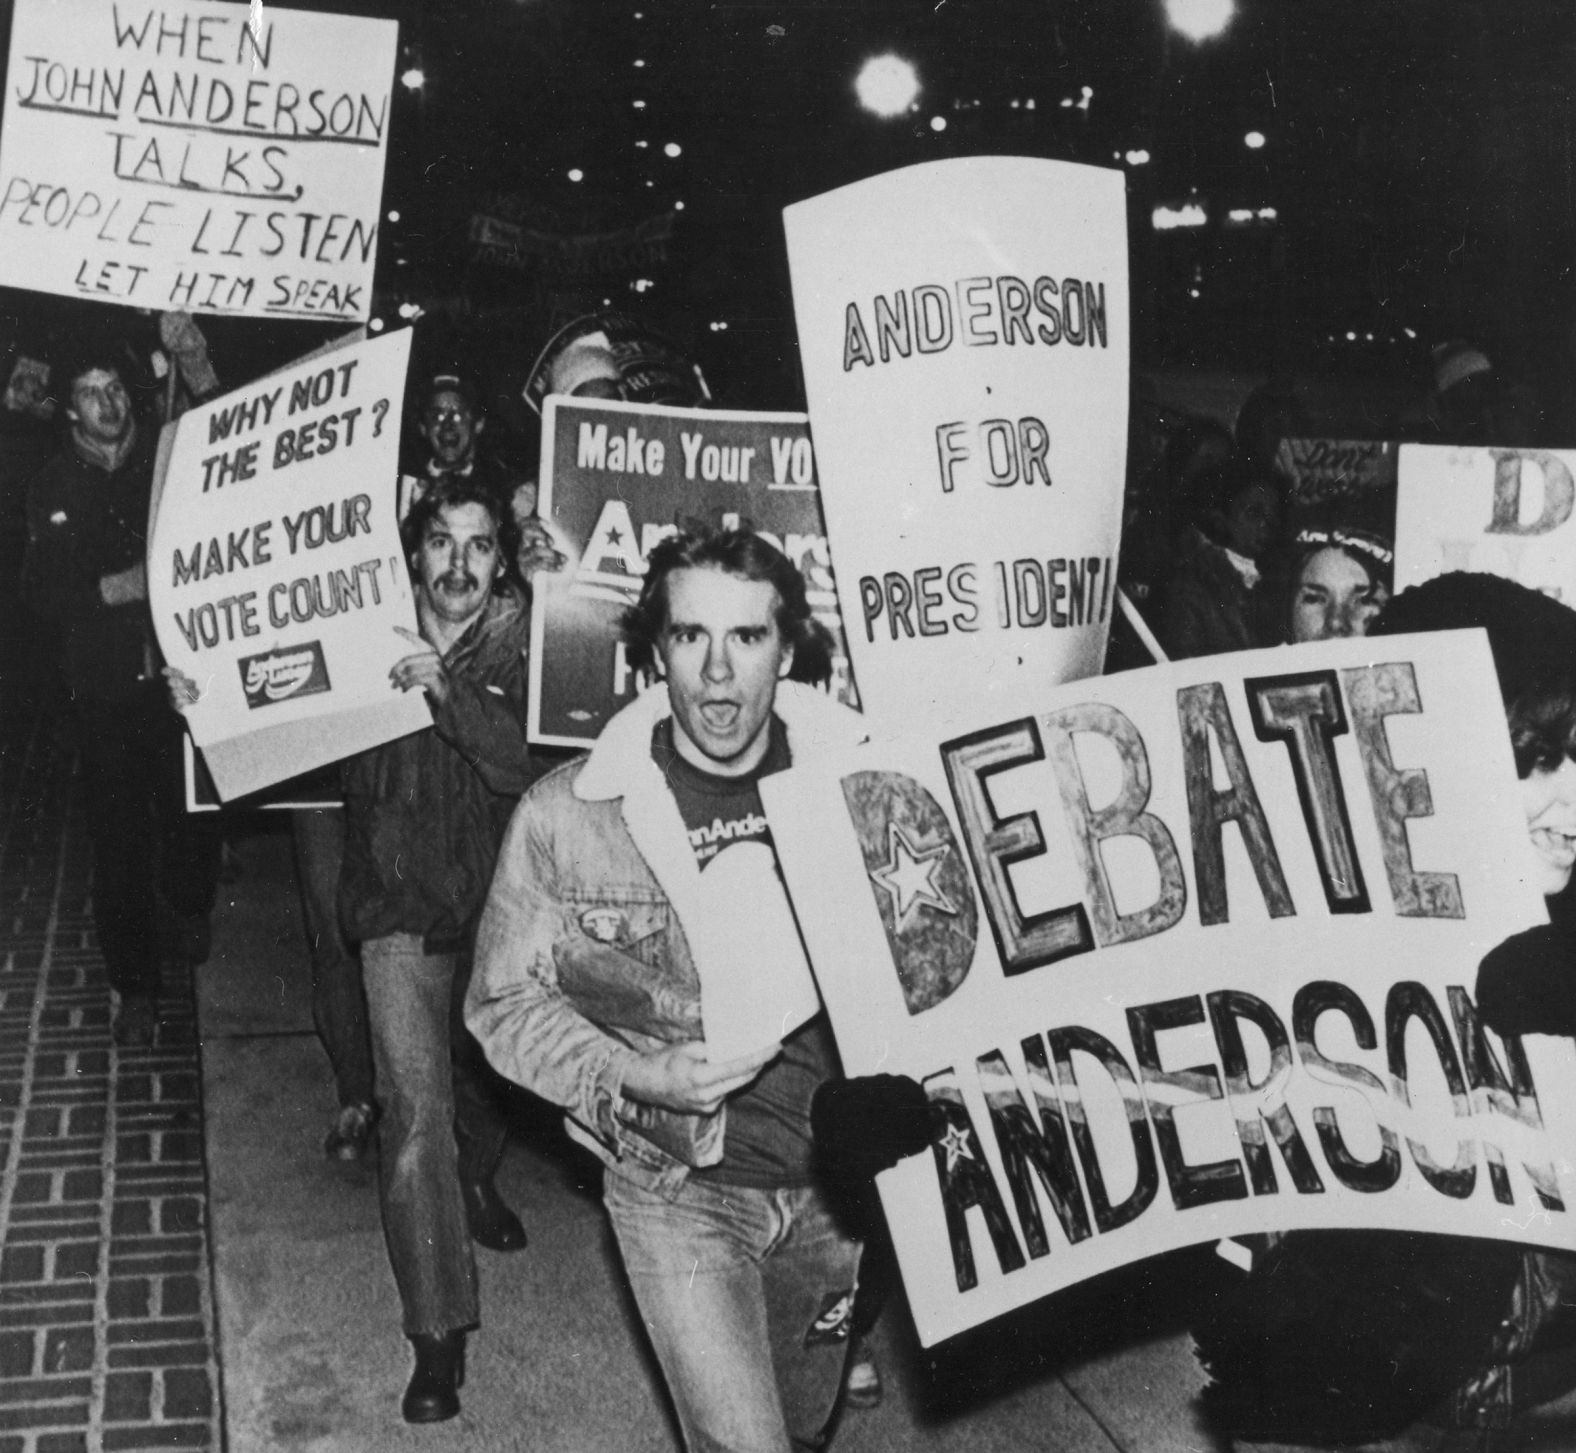 Supporters of independent candidate John B. Anderson march outside the Cleveland Convention Center in 1980, protesting the debate between President Jimmy Carter and Ronald Reagan because Anderson was not invited. Anderson had taken part in an earlier debate with the two men.